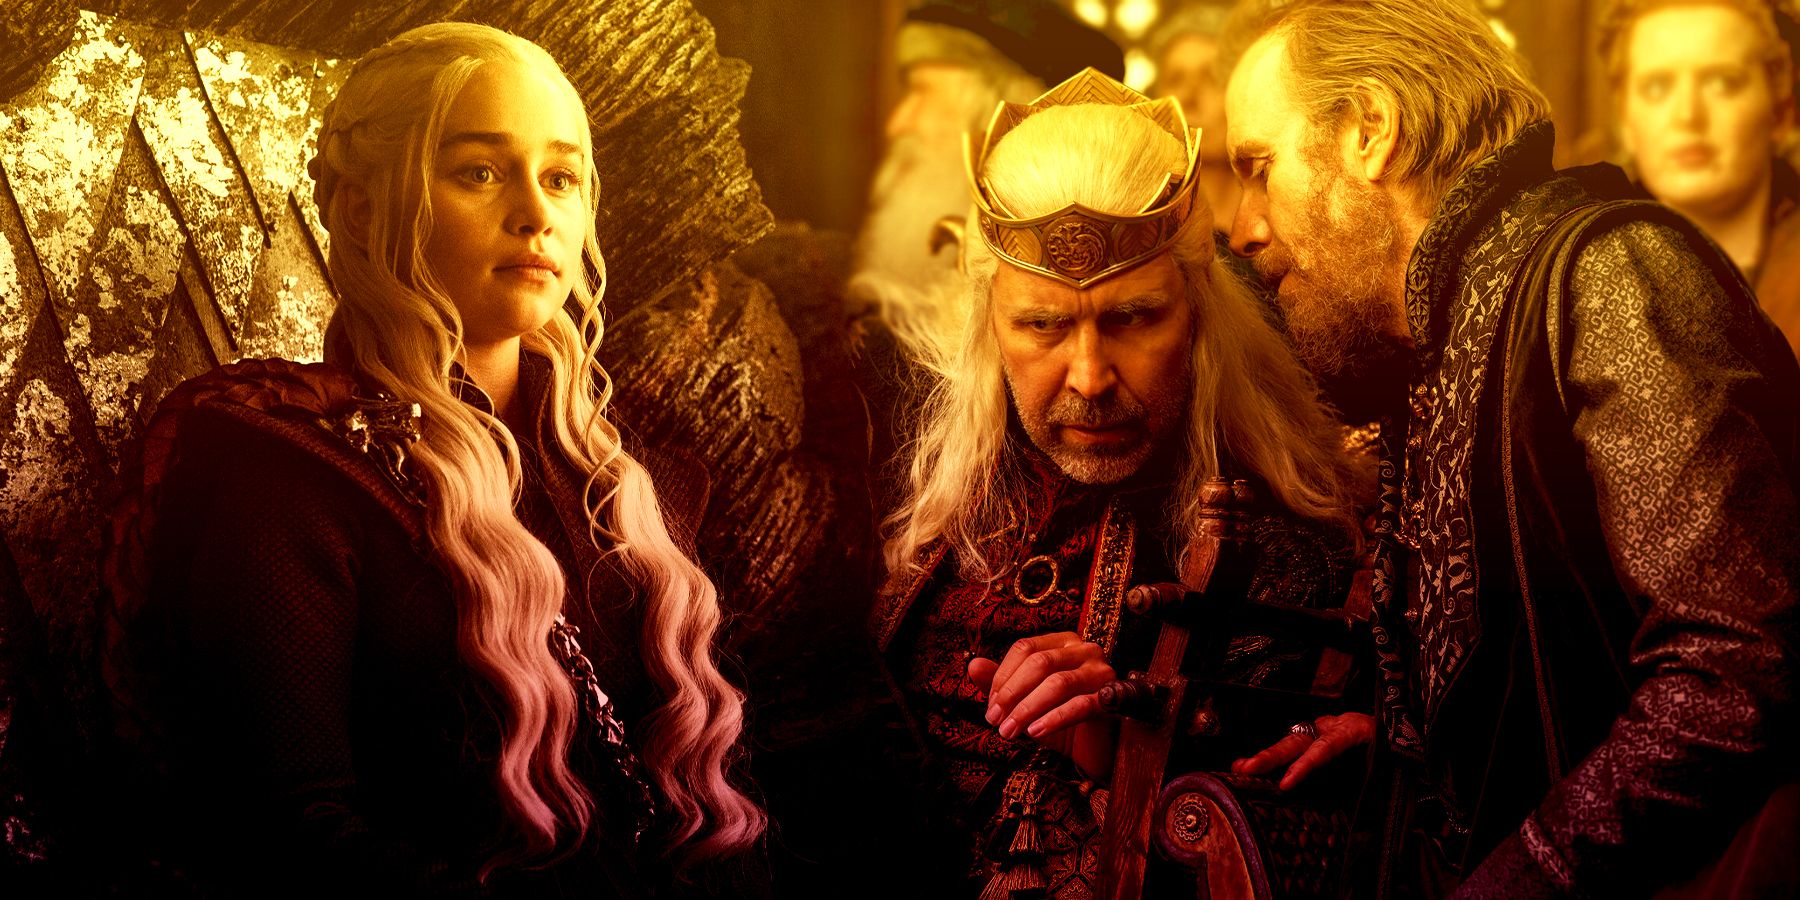 Every Game Of Thrones Main Character, Ranked By Power